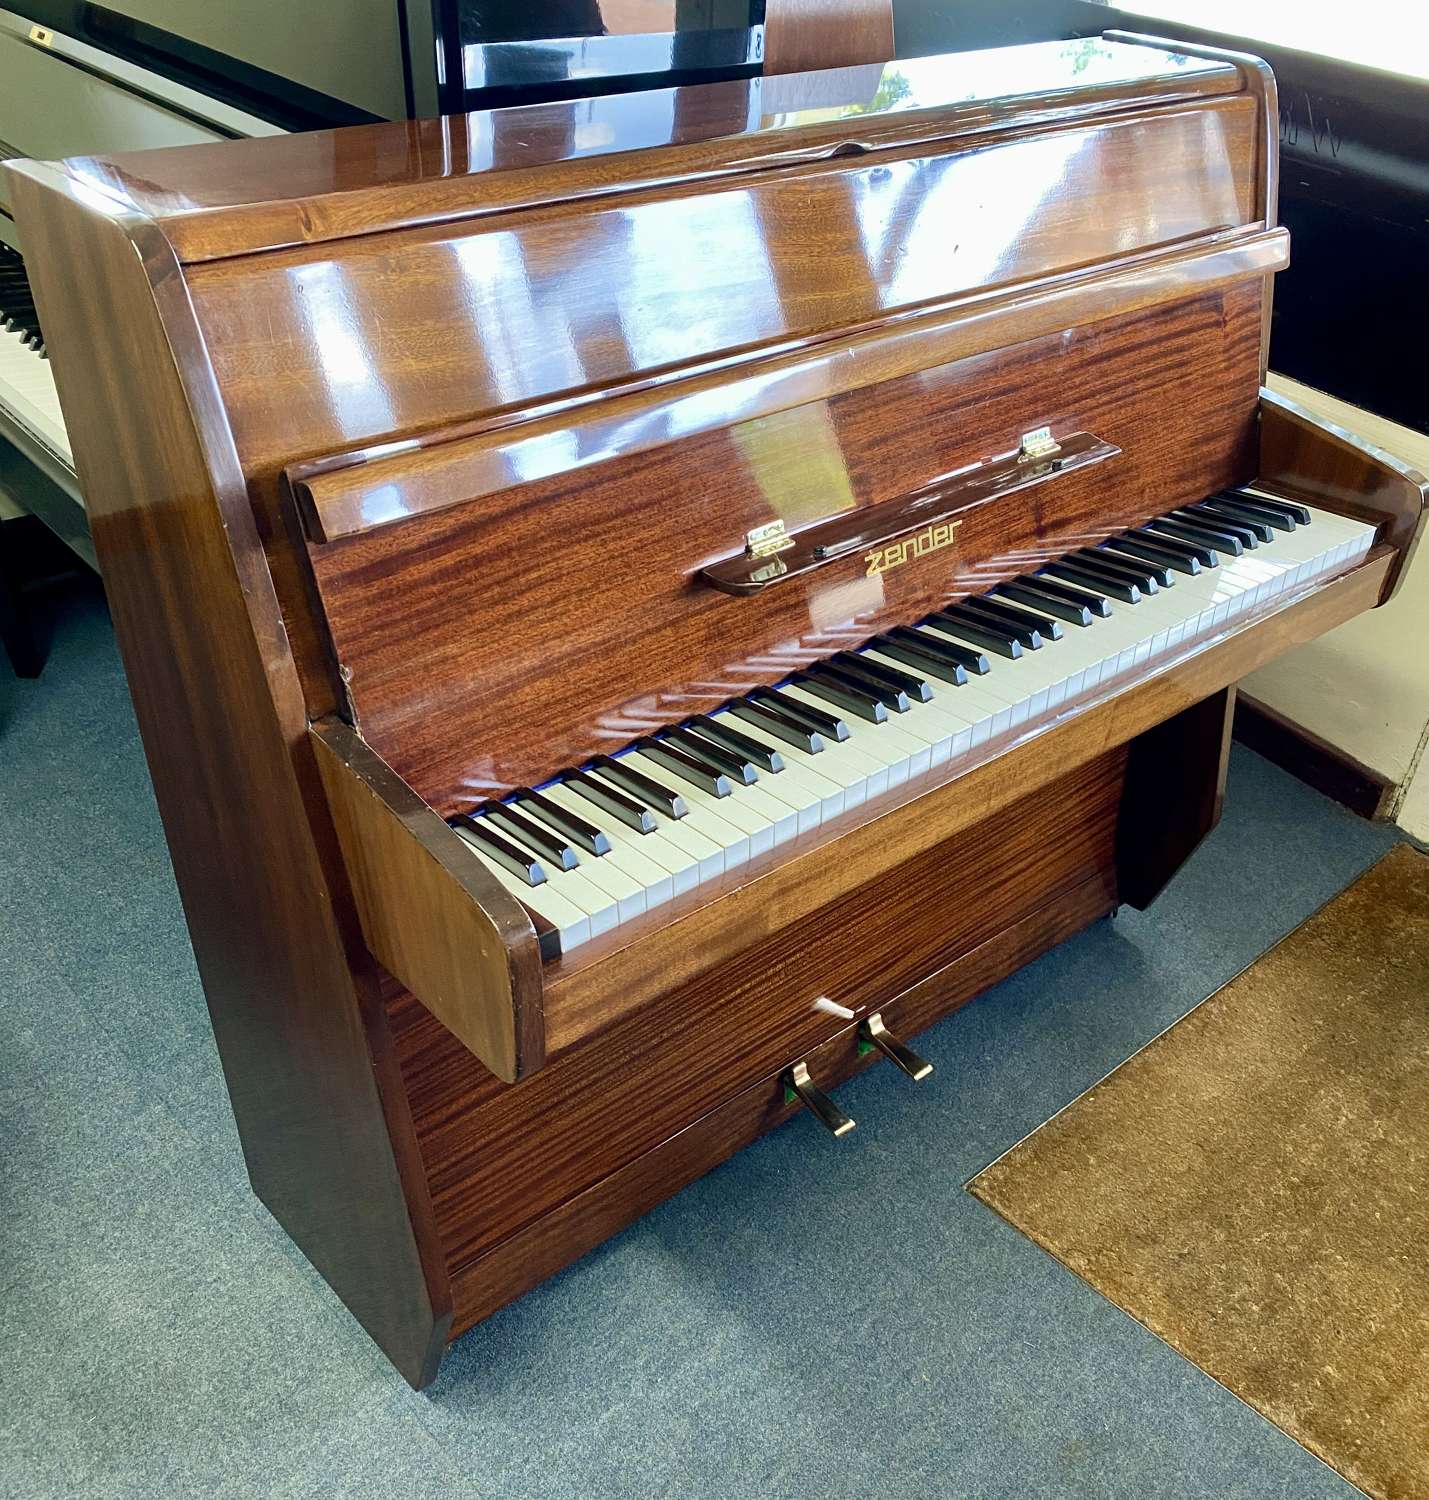 Zender 6 octave piano for sale